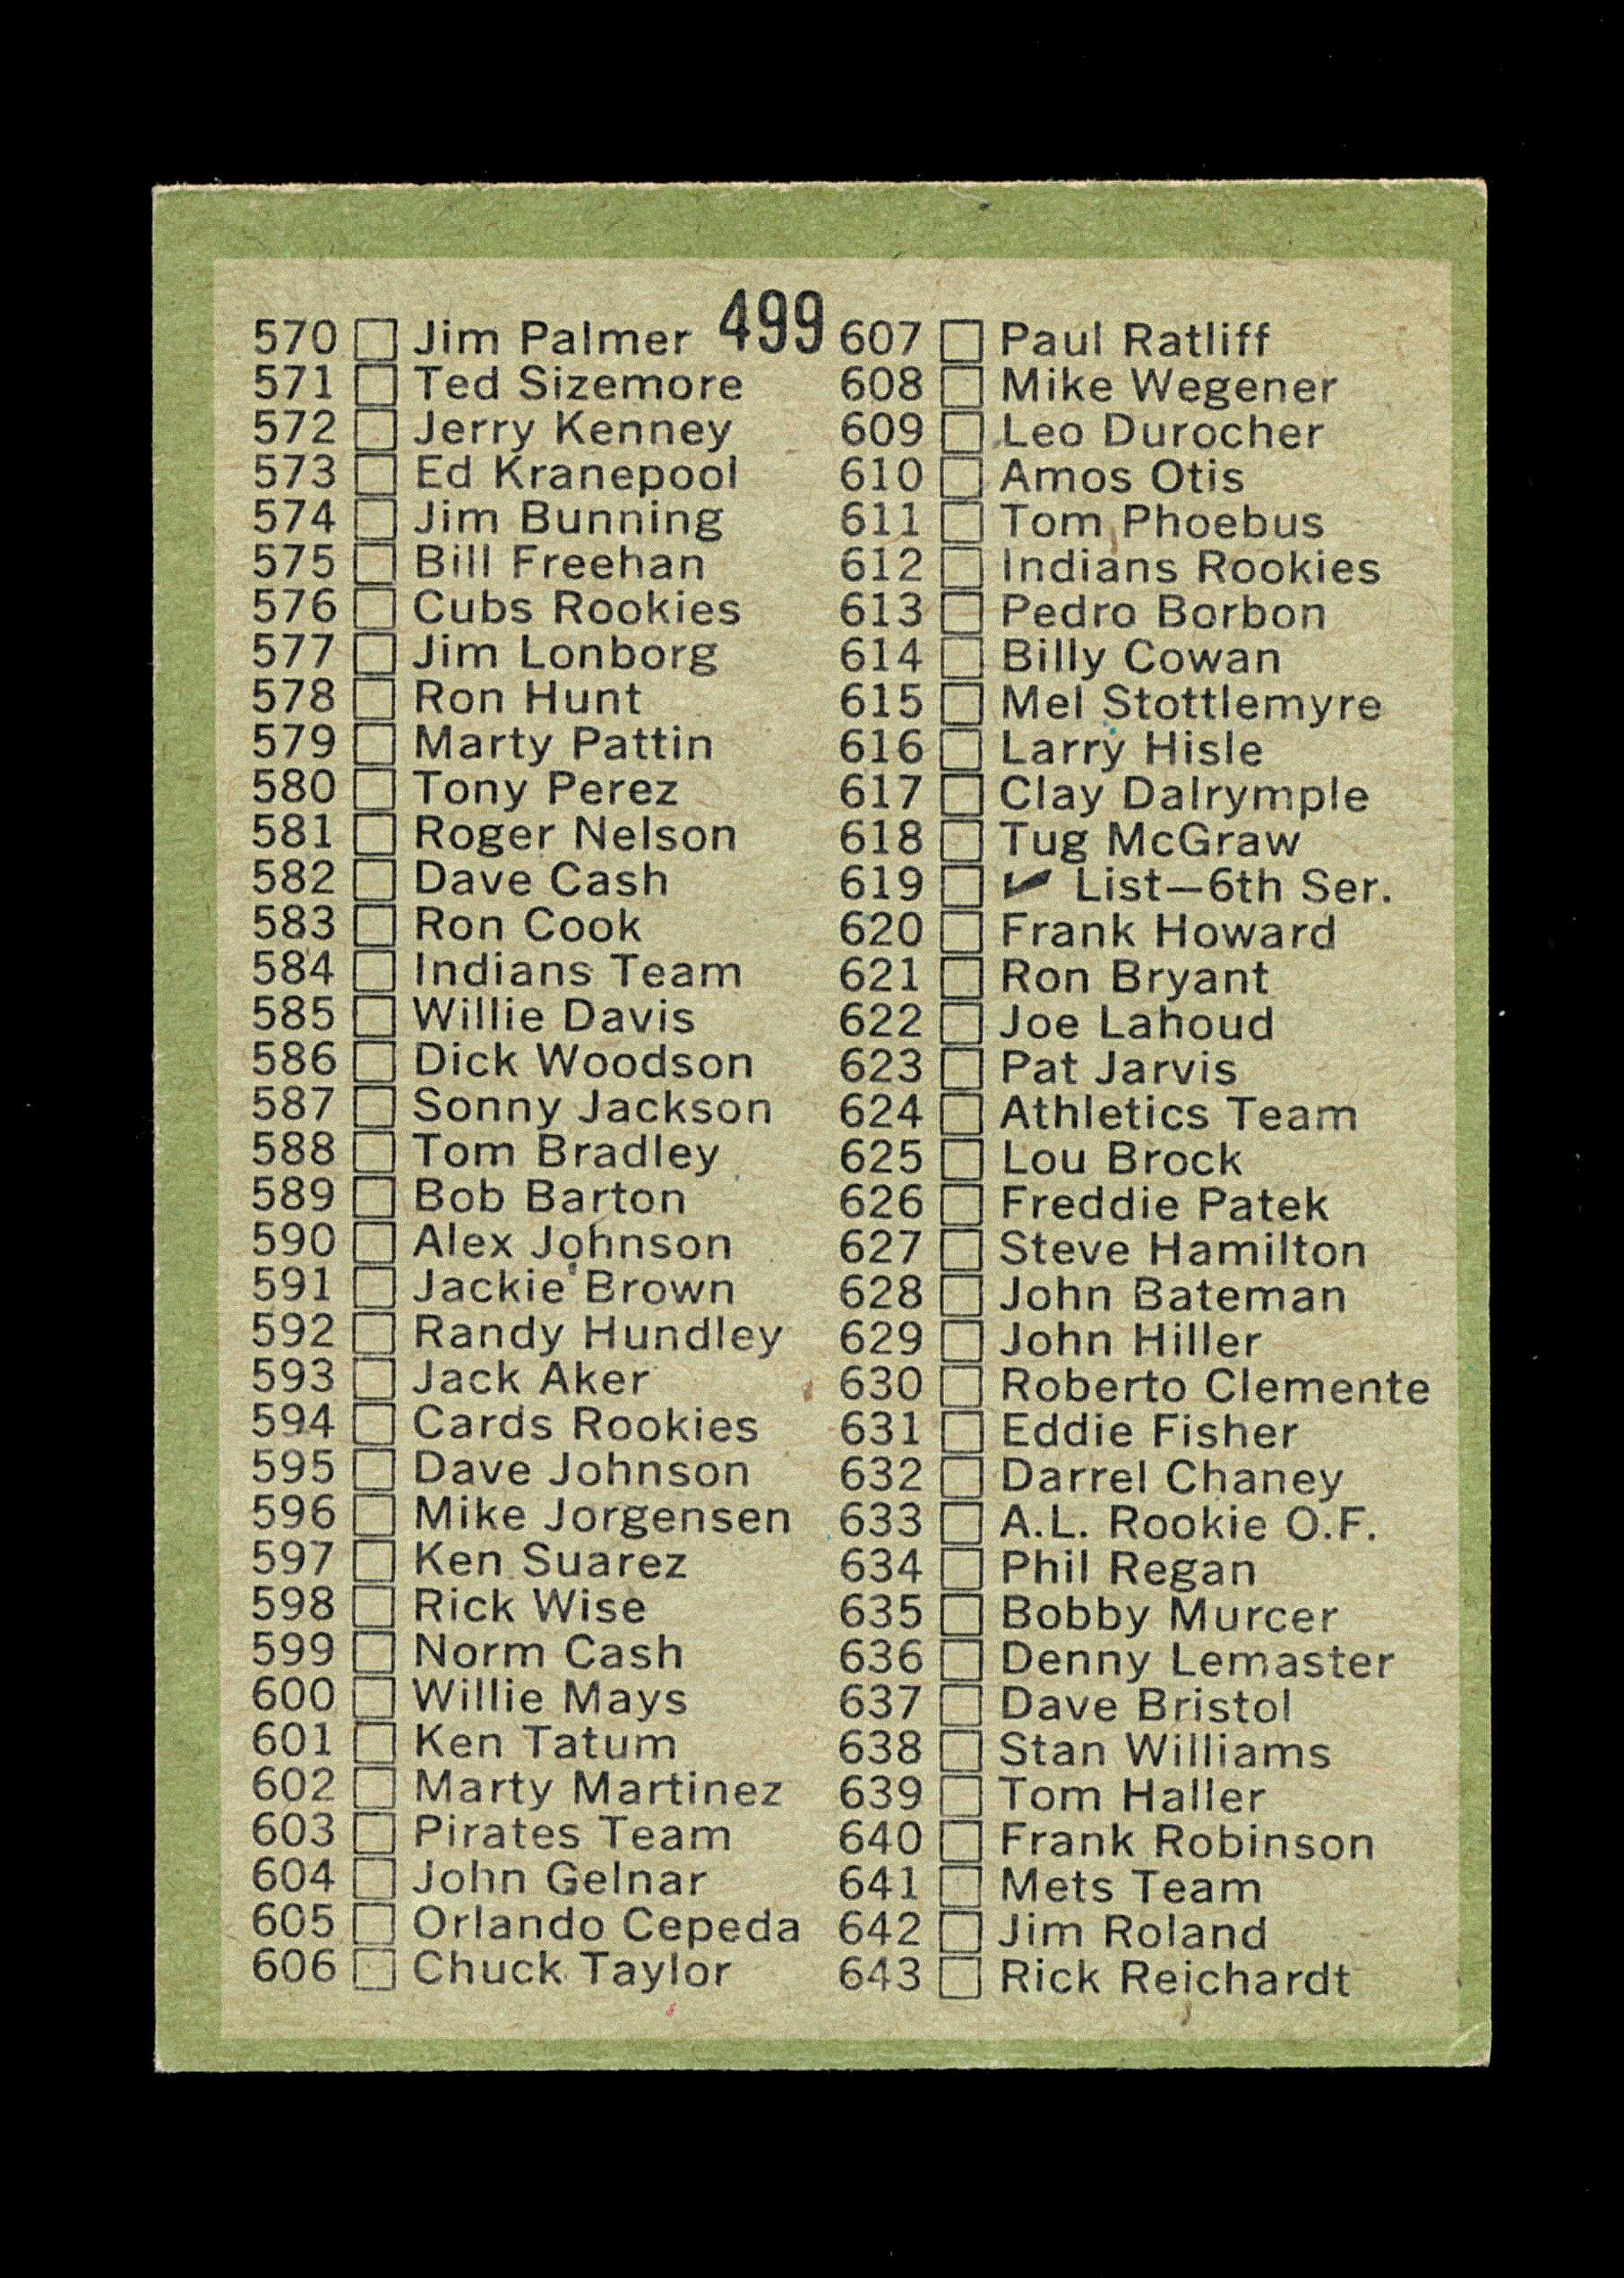 1971 Topps Baseball Card #499 5th Series Checklist 524-643. Unckecked